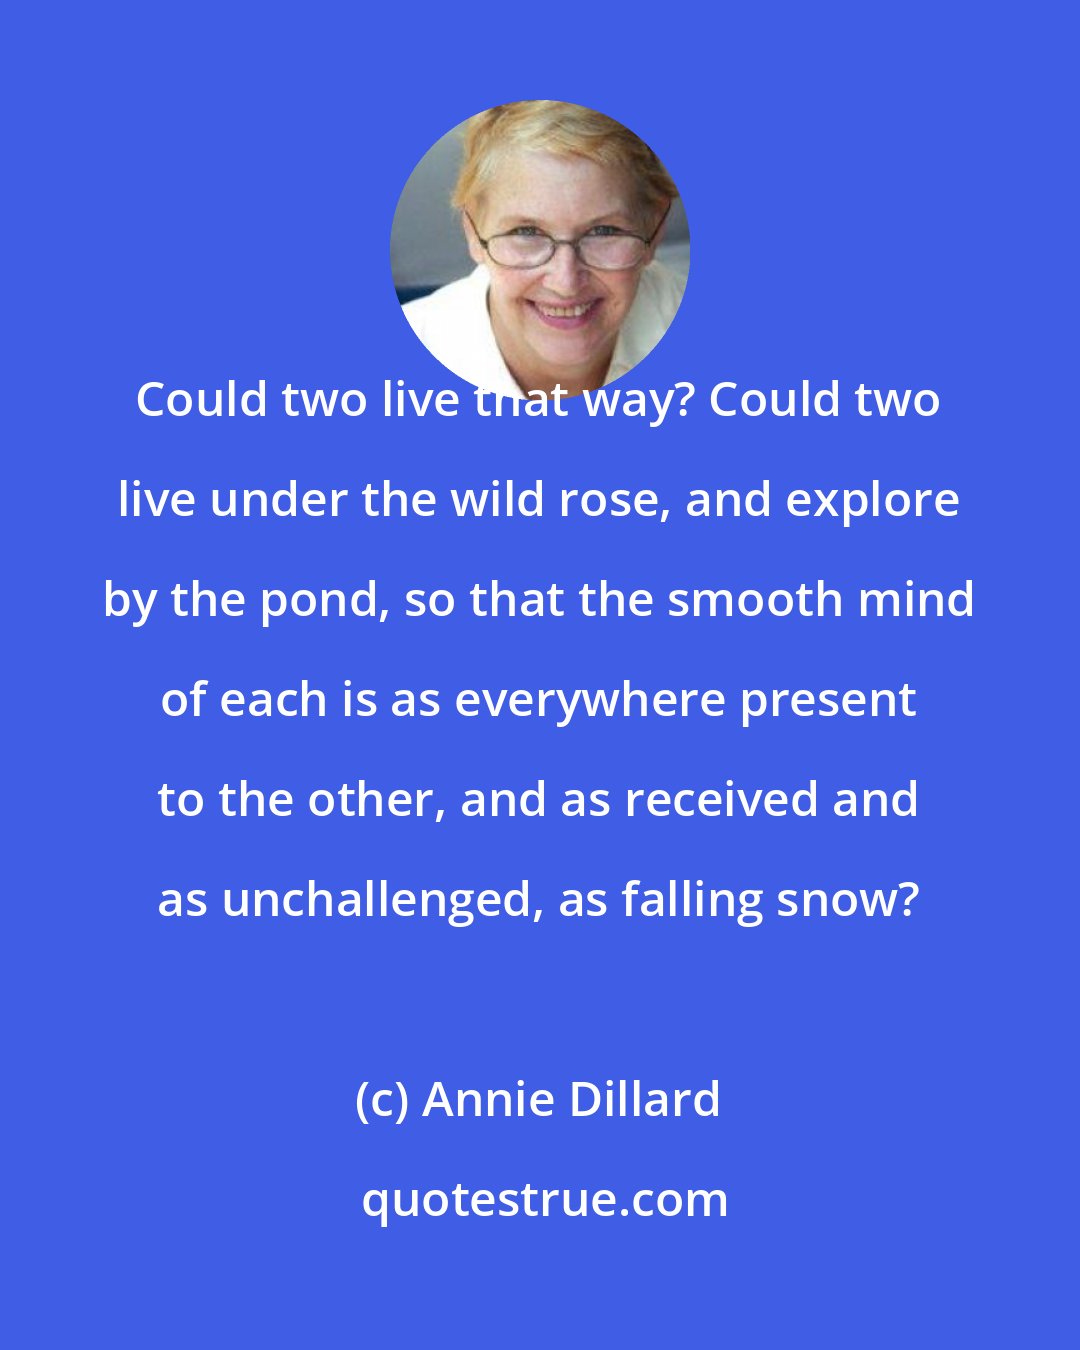 Annie Dillard: Could two live that way? Could two live under the wild rose, and explore by the pond, so that the smooth mind of each is as everywhere present to the other, and as received and as unchallenged, as falling snow?